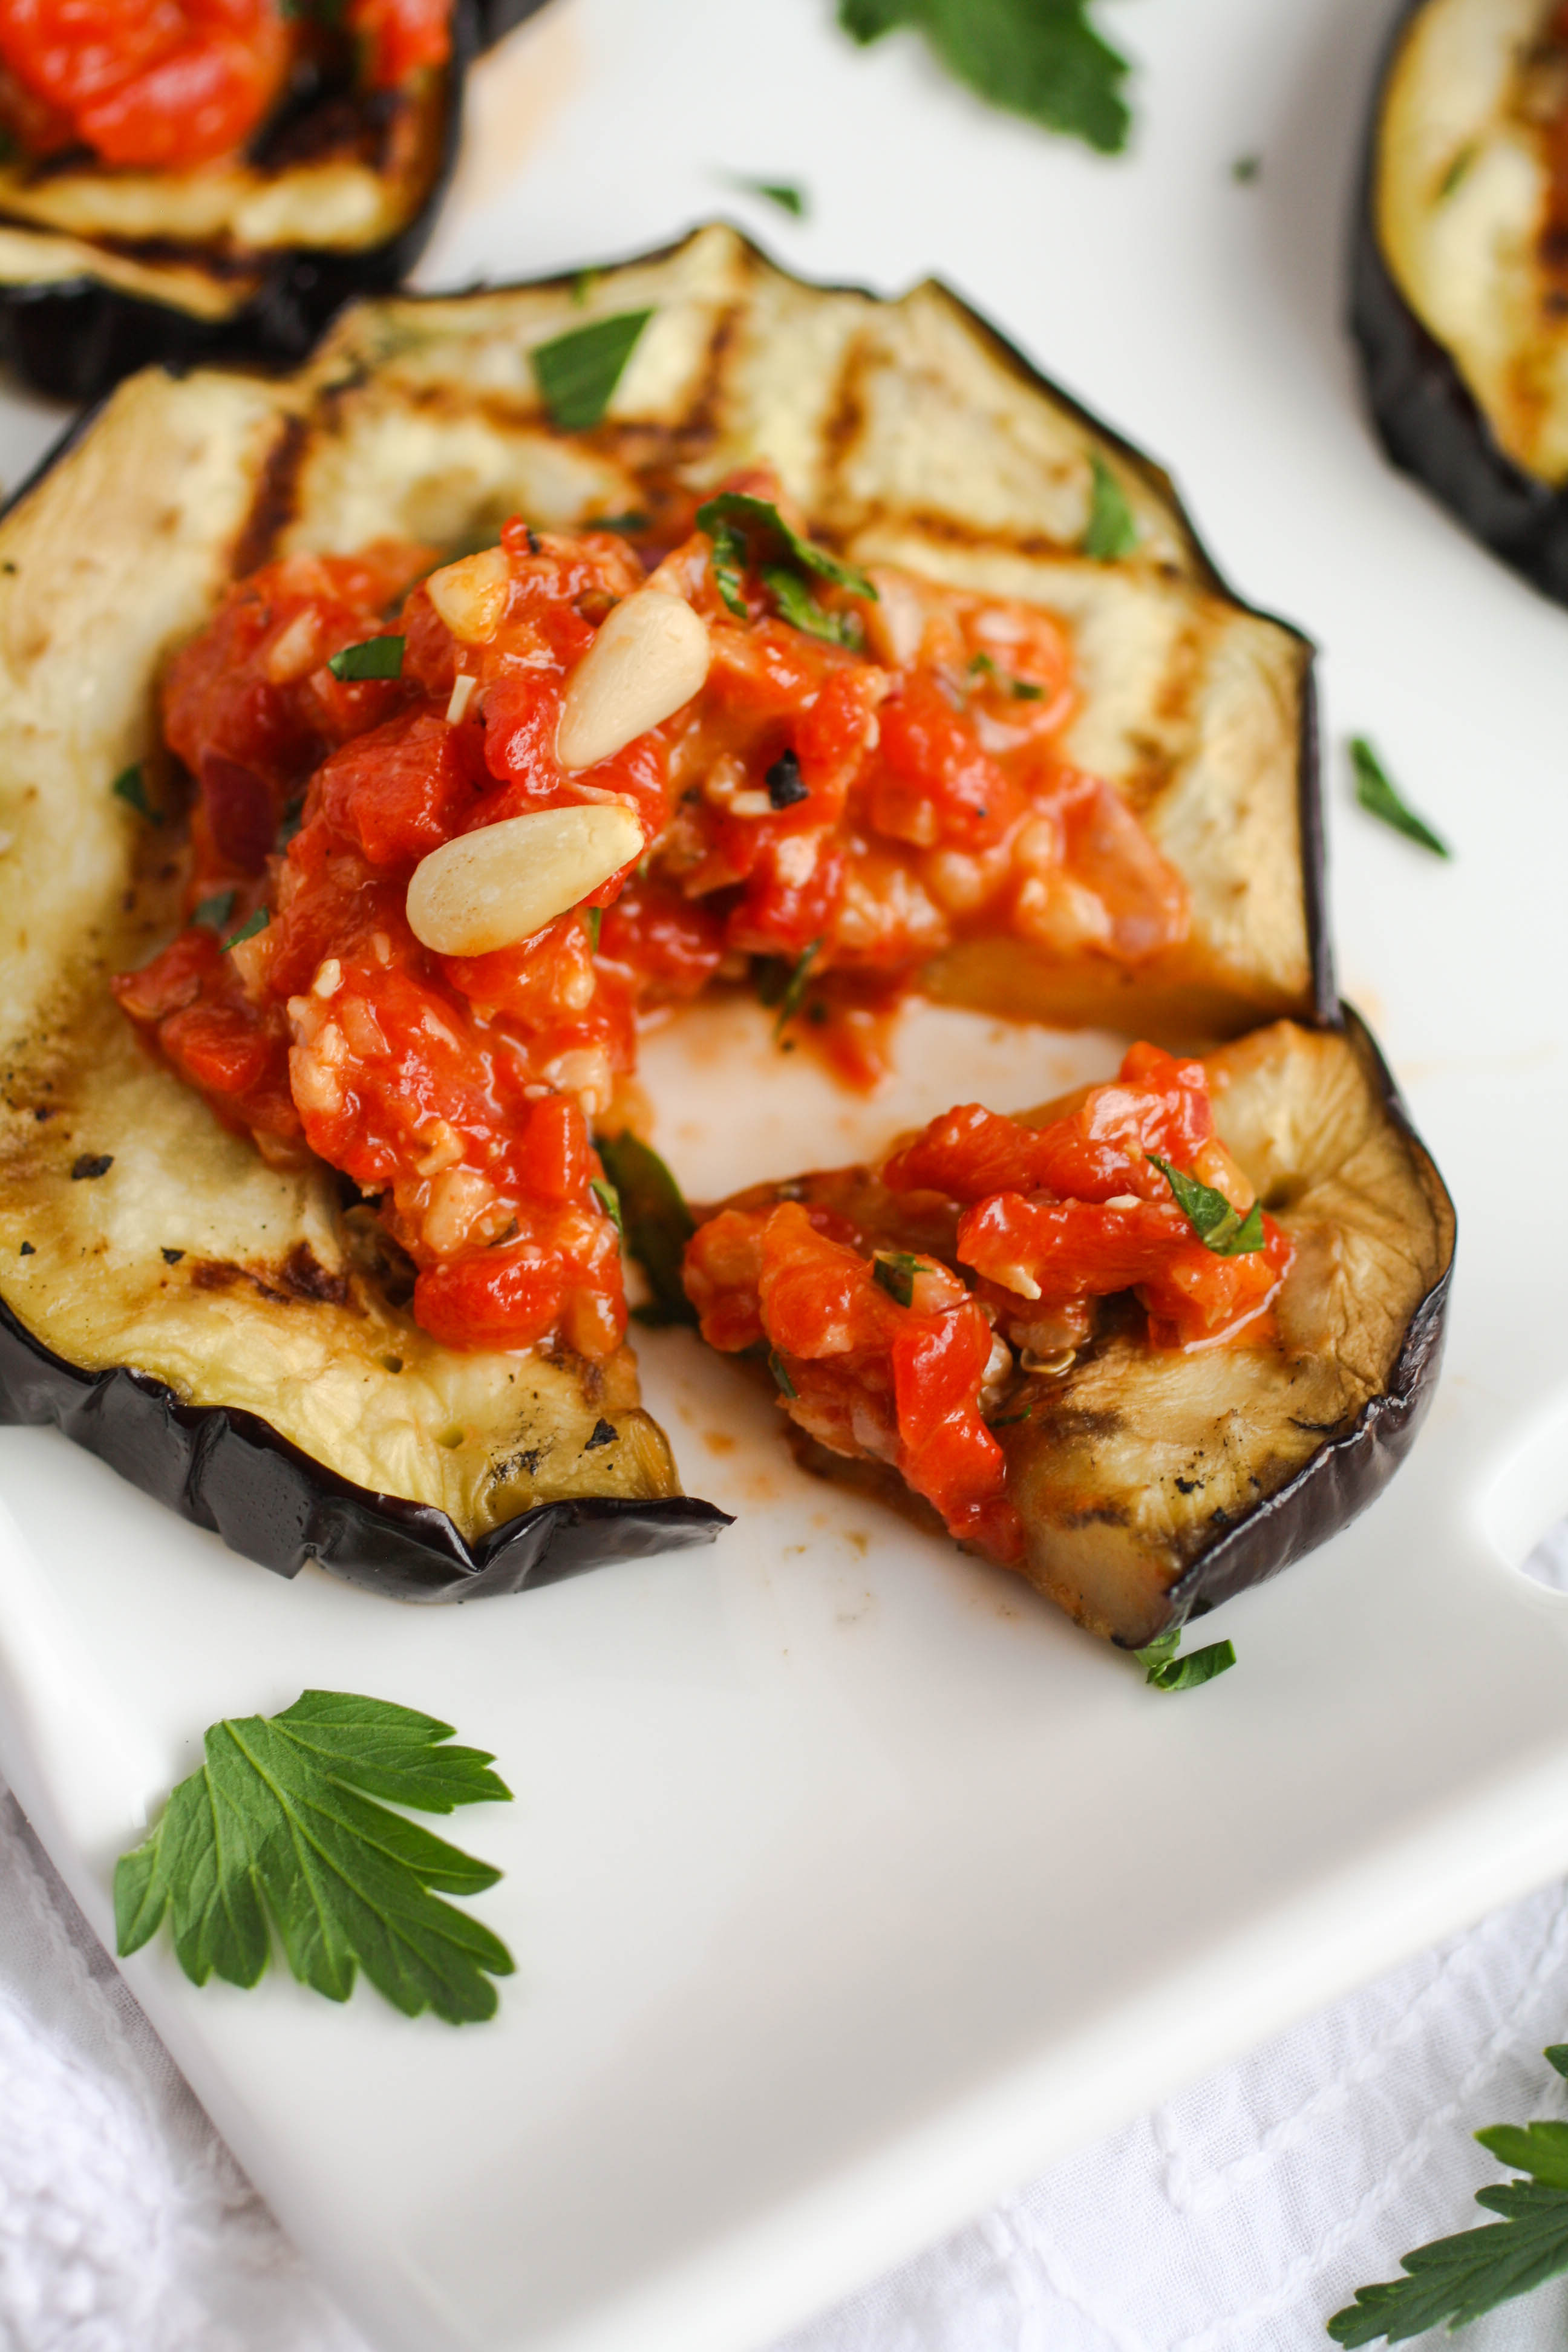 Grilled Eggplant with Roasted Red Pepper Tapenade is a fabulous summer dish. It's easy to make on the grill for a wonderful meal.